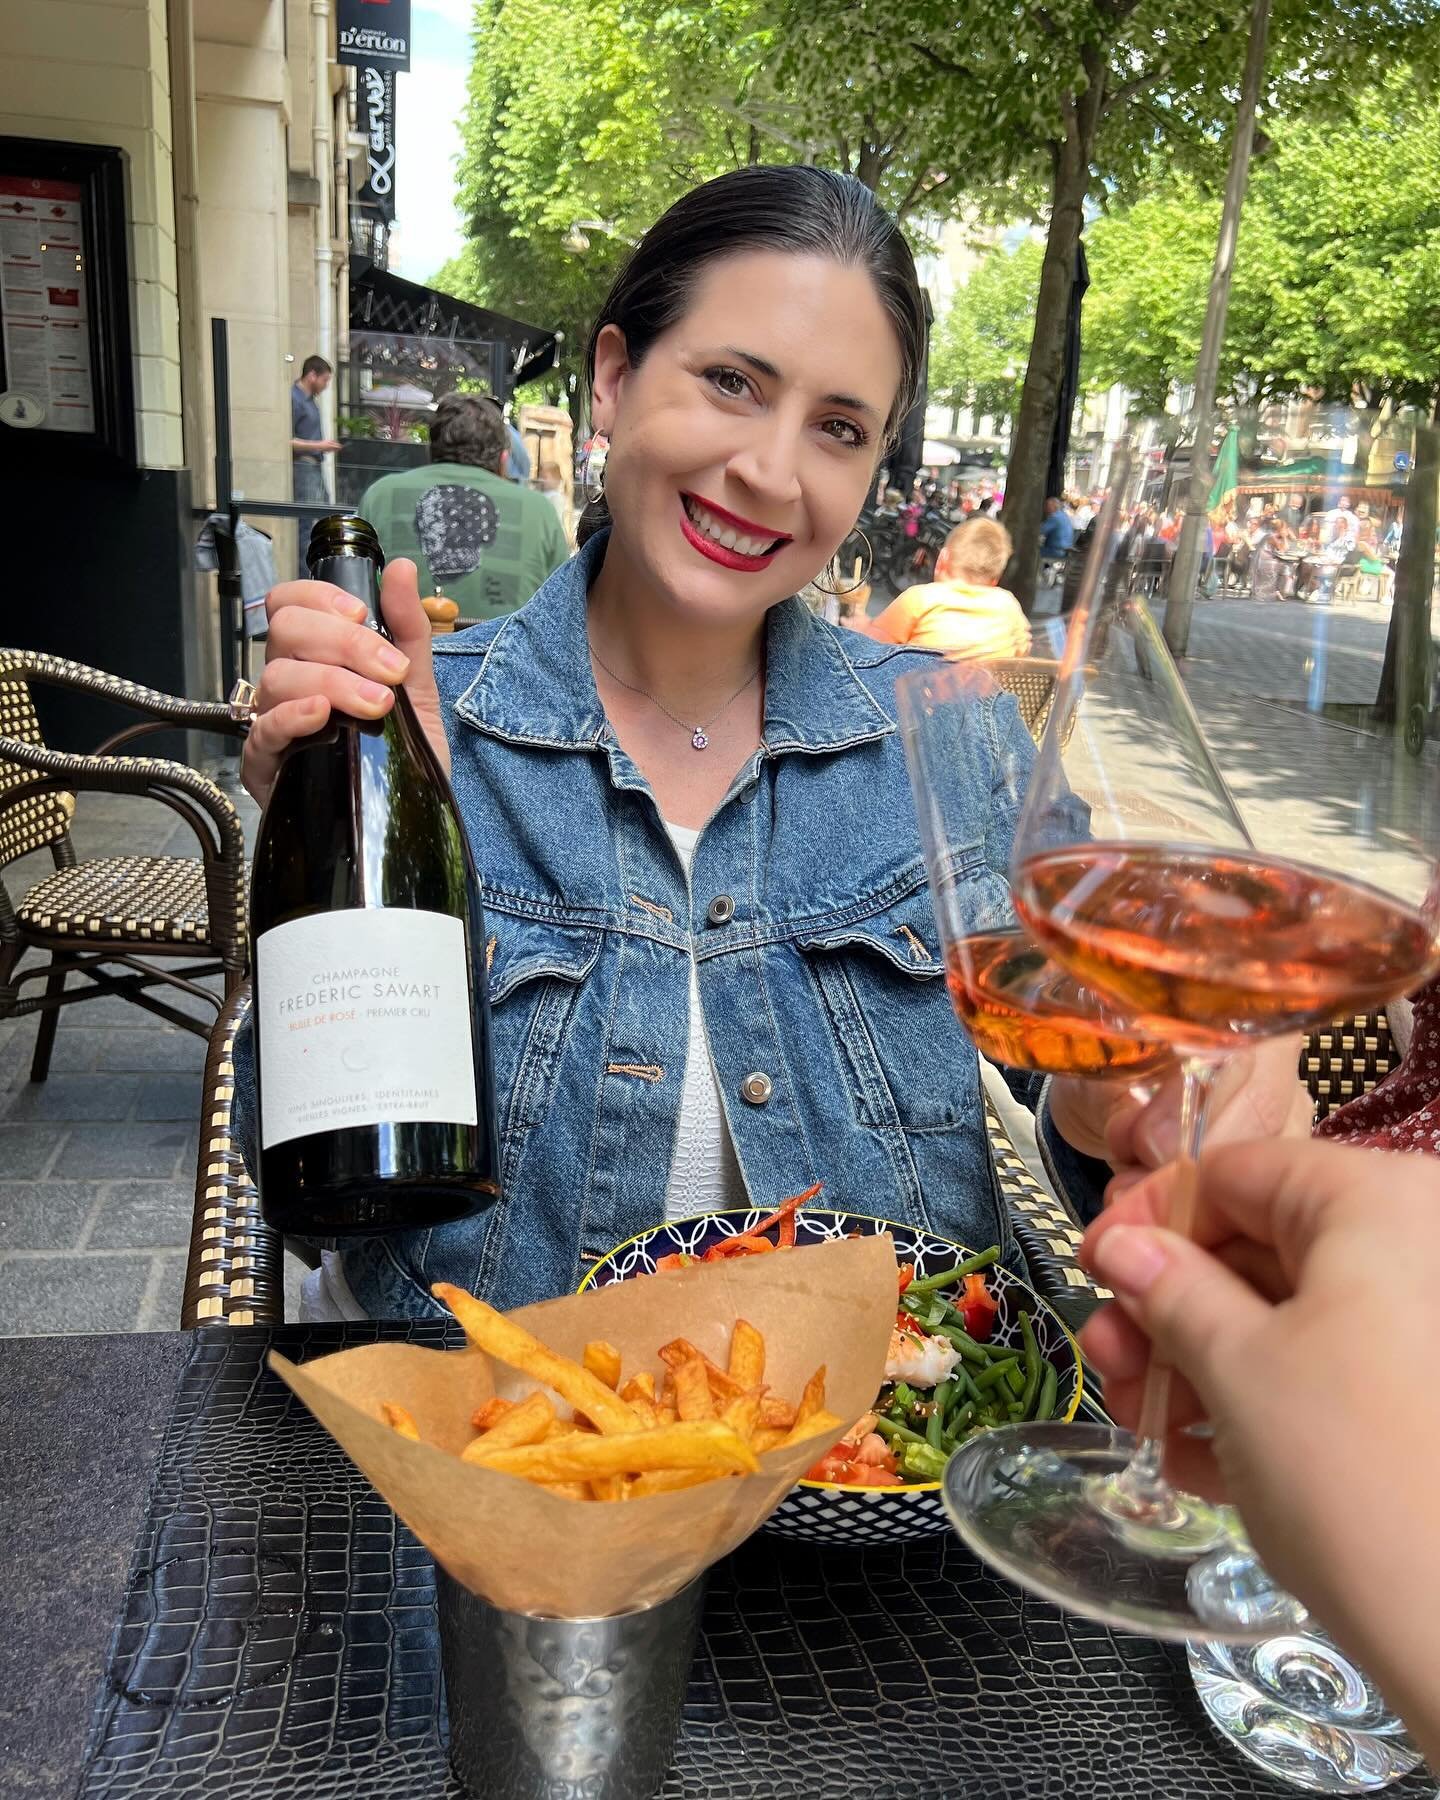 Happy Fryday!! ✨🍟

The first terrace Fryday of the year is always one of the best ones! Felt so good to sit on the terrace @thegluepot in the sunshine ☀️ even better when enjoyed with new wine friends 

Salmon salad - fresh, delicious and perfect to